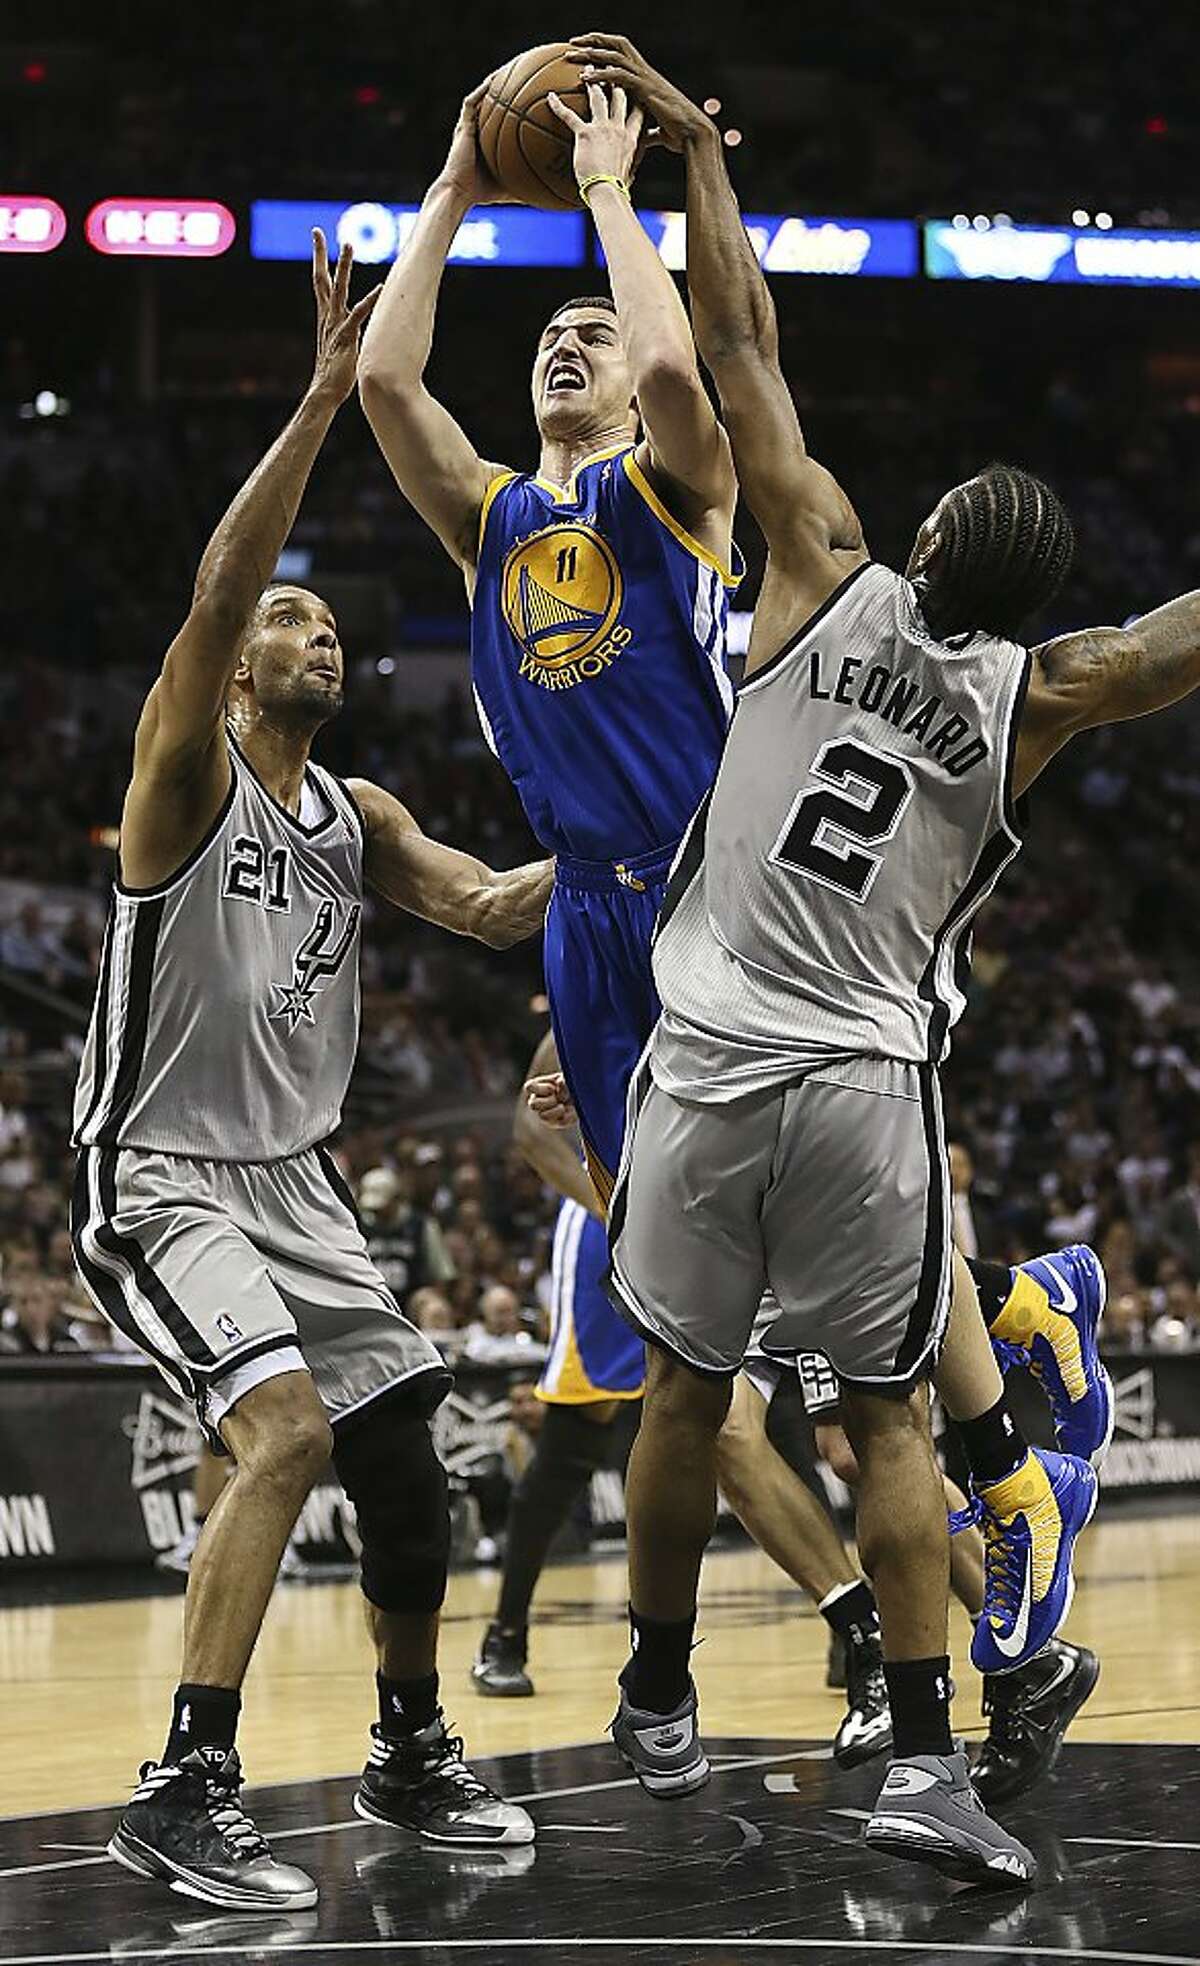 Golden State Warriors' Klay Thompson drives between San Antonio Spurs' Tim Duncan and Kawhi Leonard during the second half of Game 2 in the NBA Western Conference semifinals at the AT&T Center, Wednesday, May 8, 2013. The Warriors won, 100-91 to even the series at 1-1.